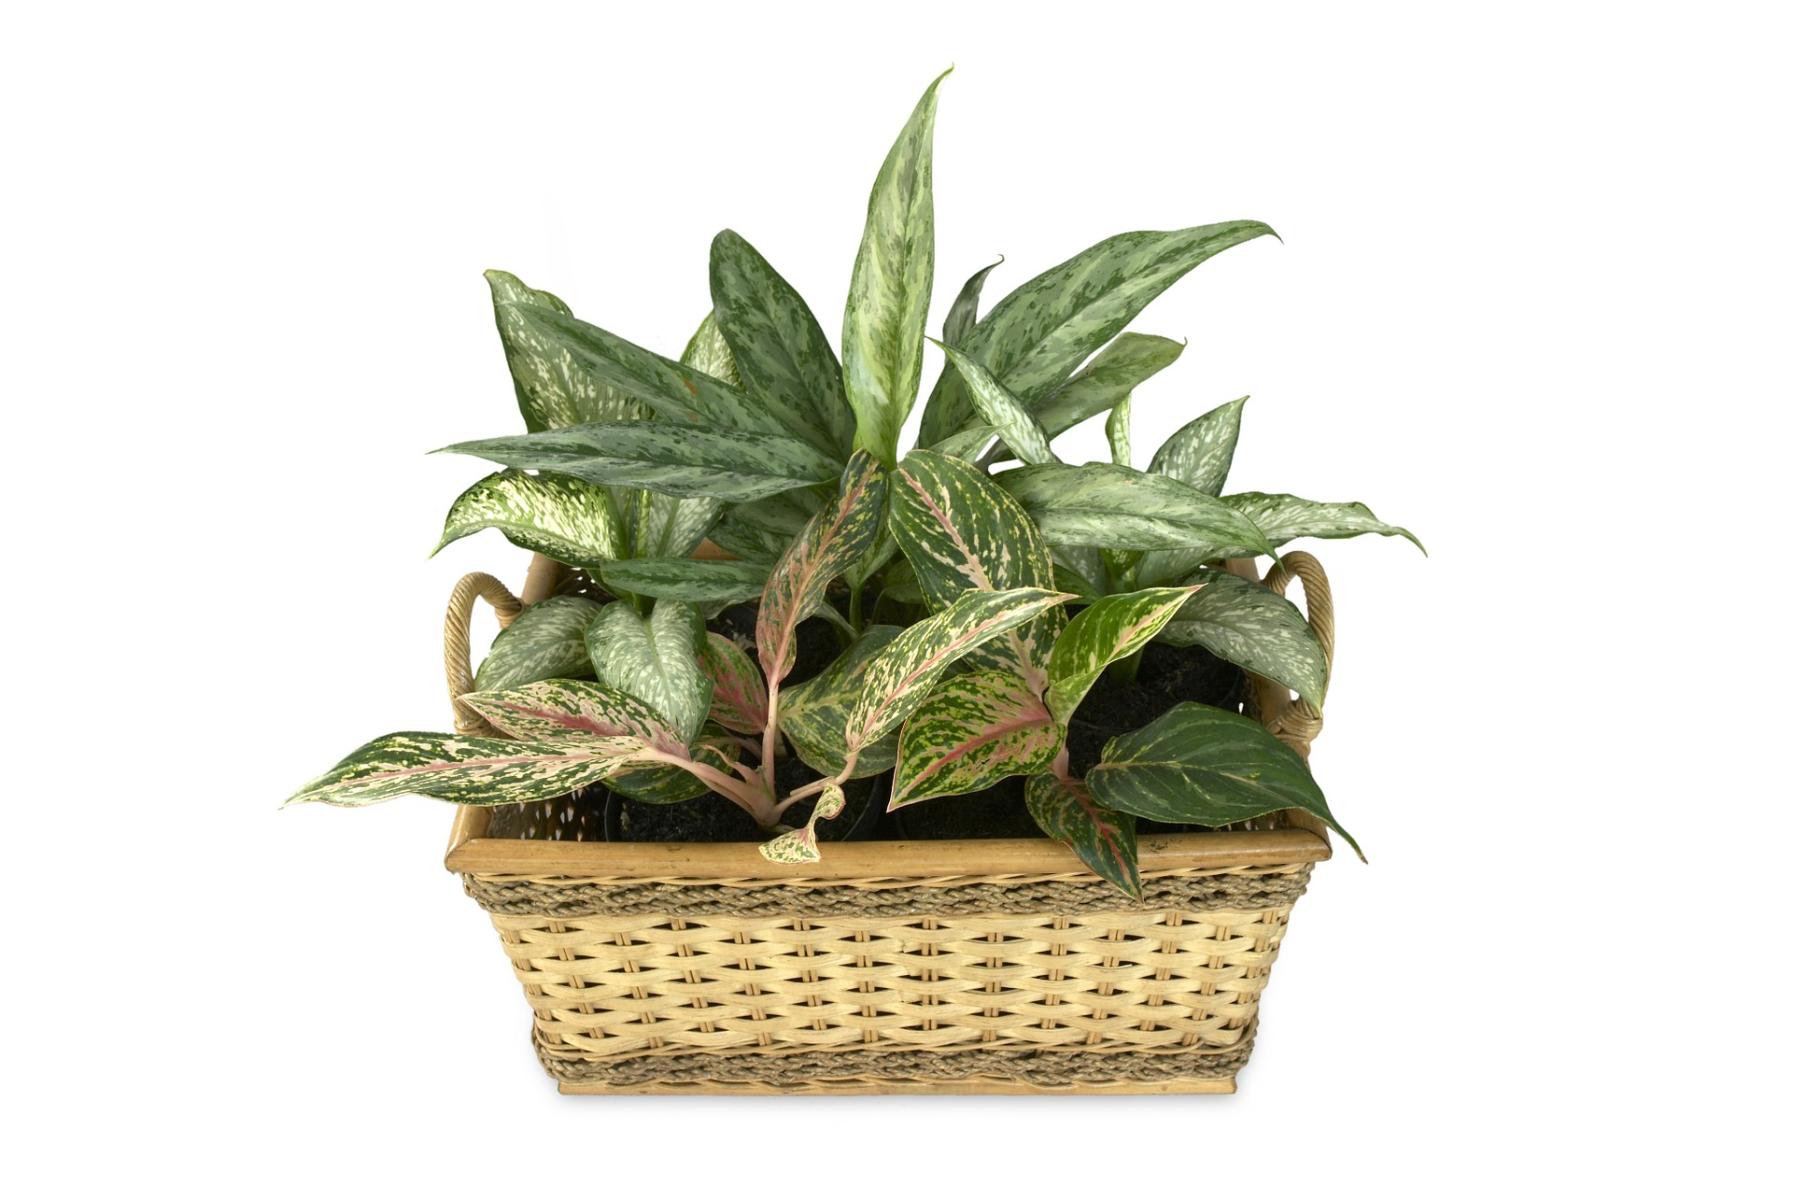 Image of Aglaonema spp. or Chinese evergreen.